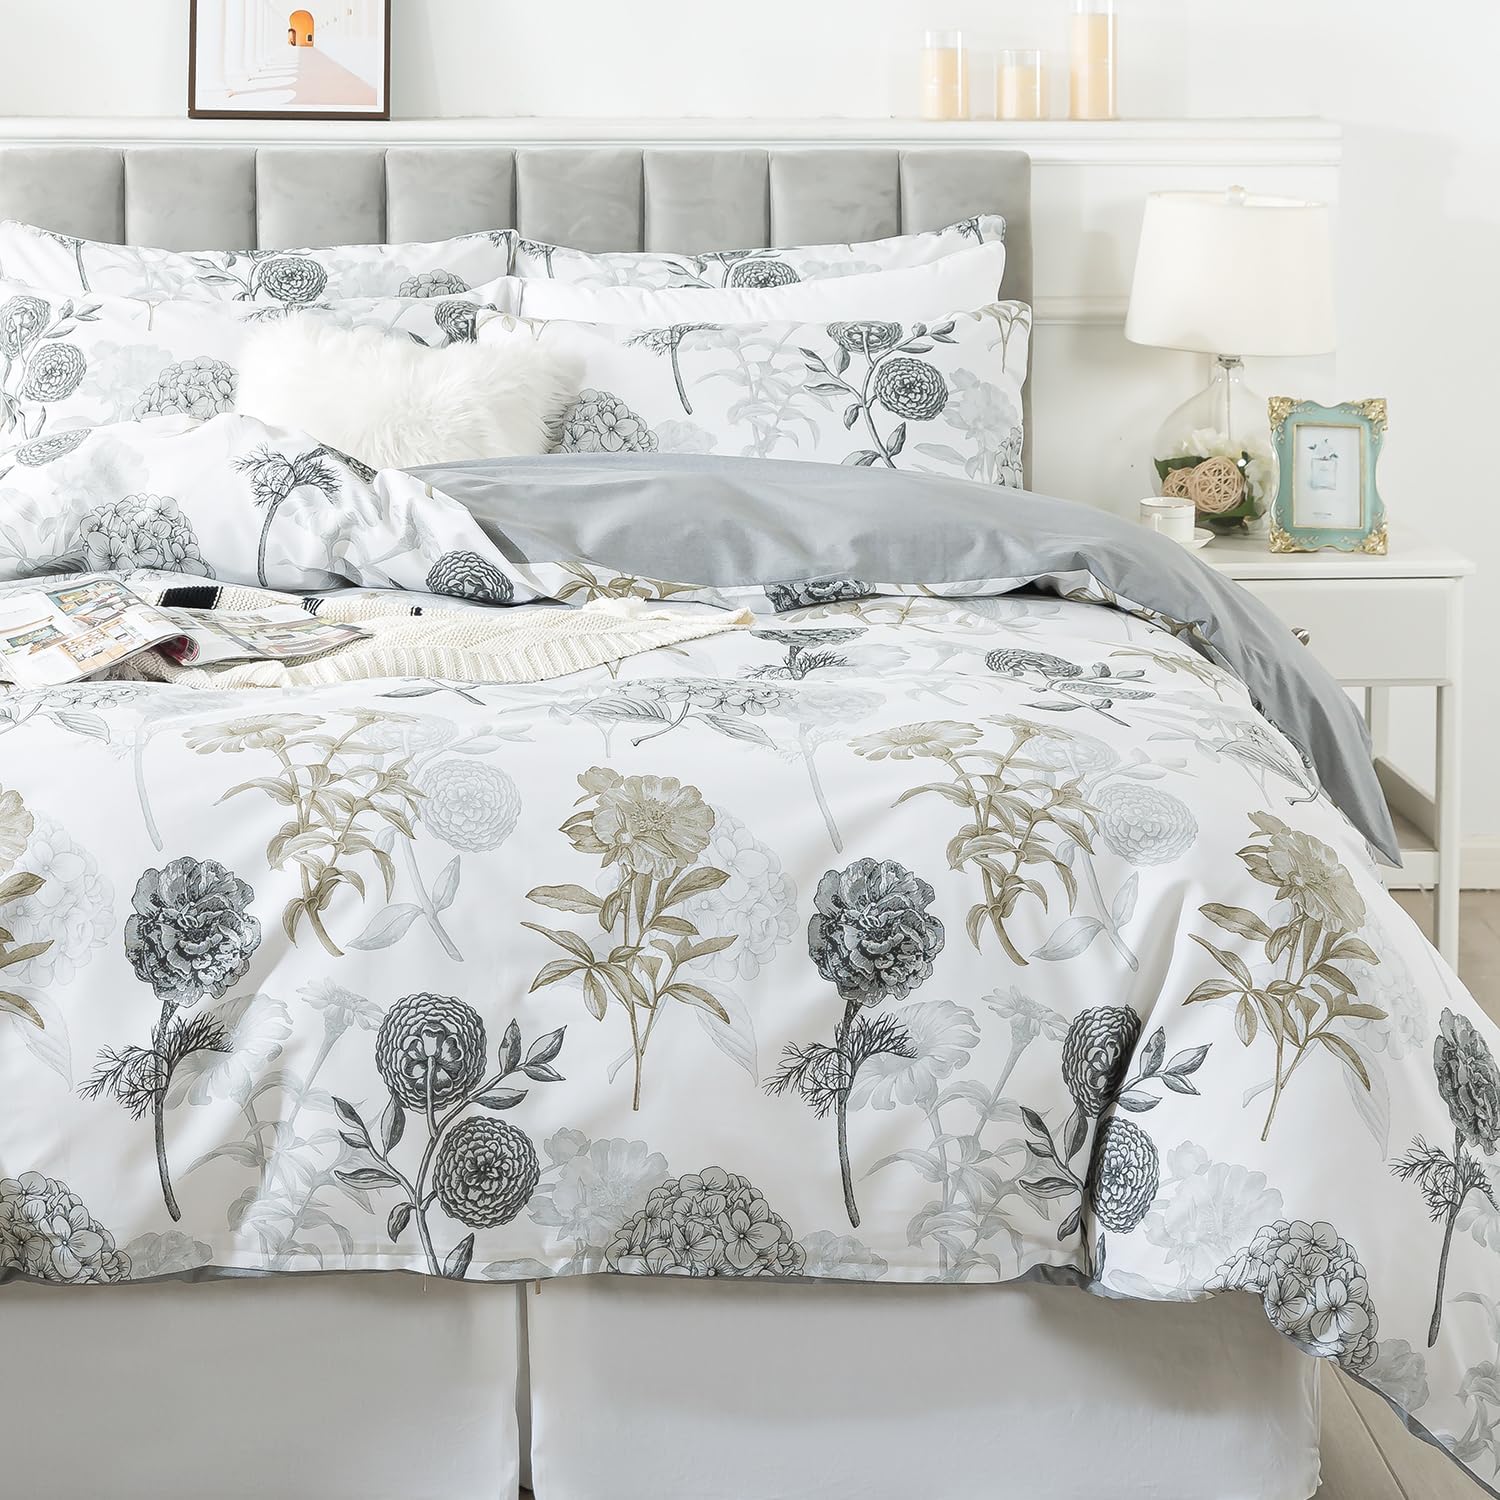 FADFAY Floral Duvet Cover Sets Queen Size 100% Cotton Ink Grey Vintage Flower Patterned Hydrangea Comforter Cover Farmhouse Bedding for All Season Soft Crisp Luxury Bed Cover with Zipper 3 Pieces